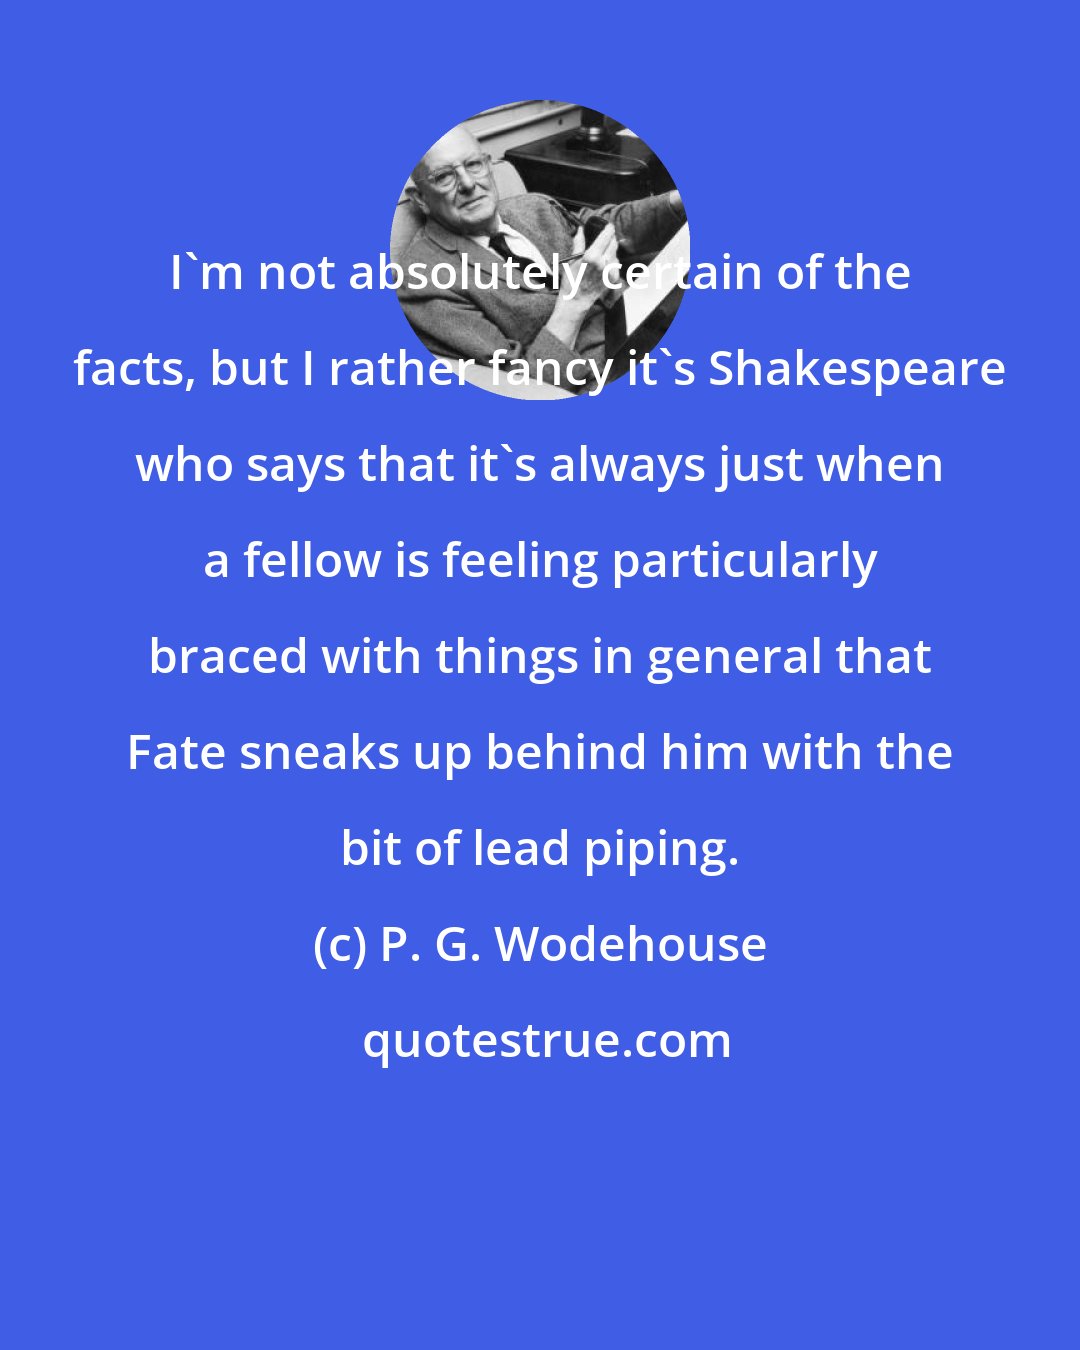 P. G. Wodehouse: I'm not absolutely certain of the facts, but I rather fancy it's Shakespeare who says that it's always just when a fellow is feeling particularly braced with things in general that Fate sneaks up behind him with the bit of lead piping.